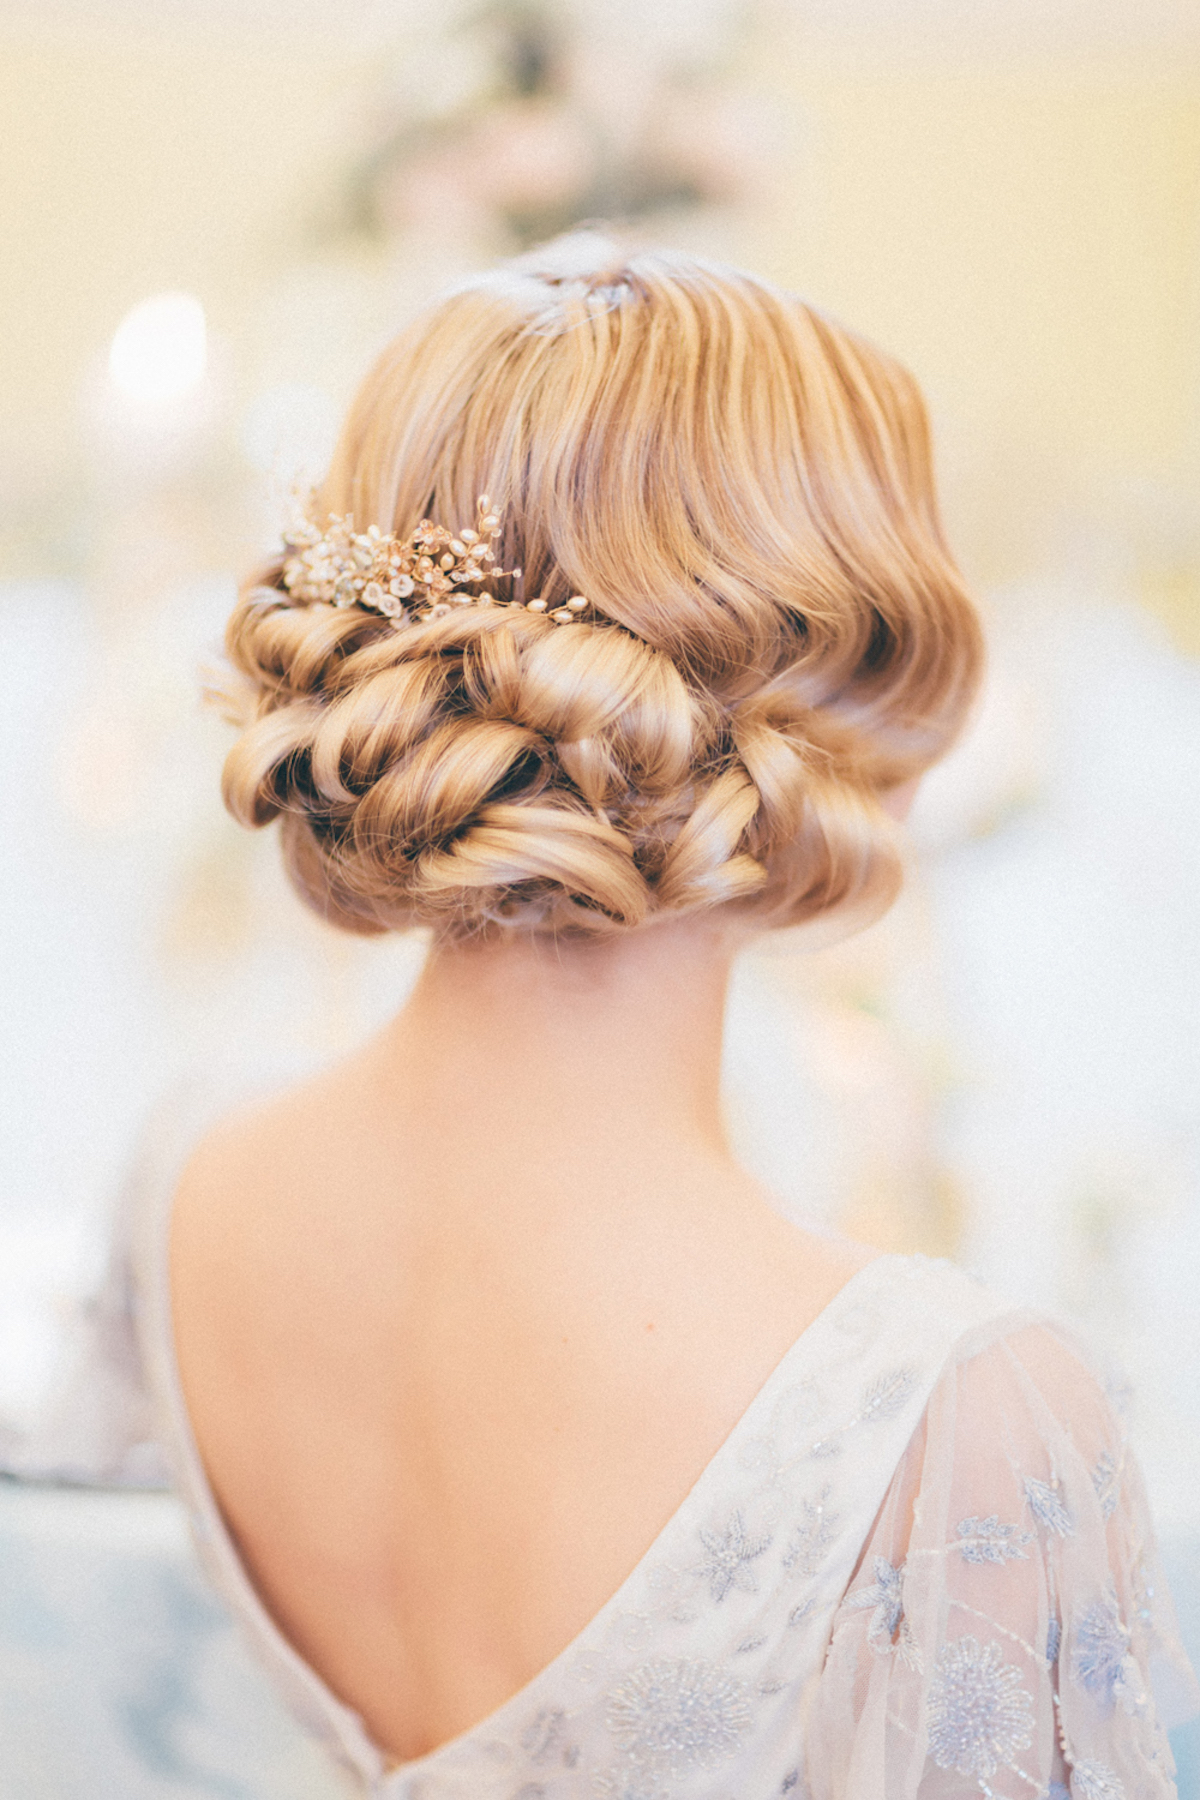 Beautiful bridal hair and makeup from Lipstick & Curls, who now offer nationwide coverage